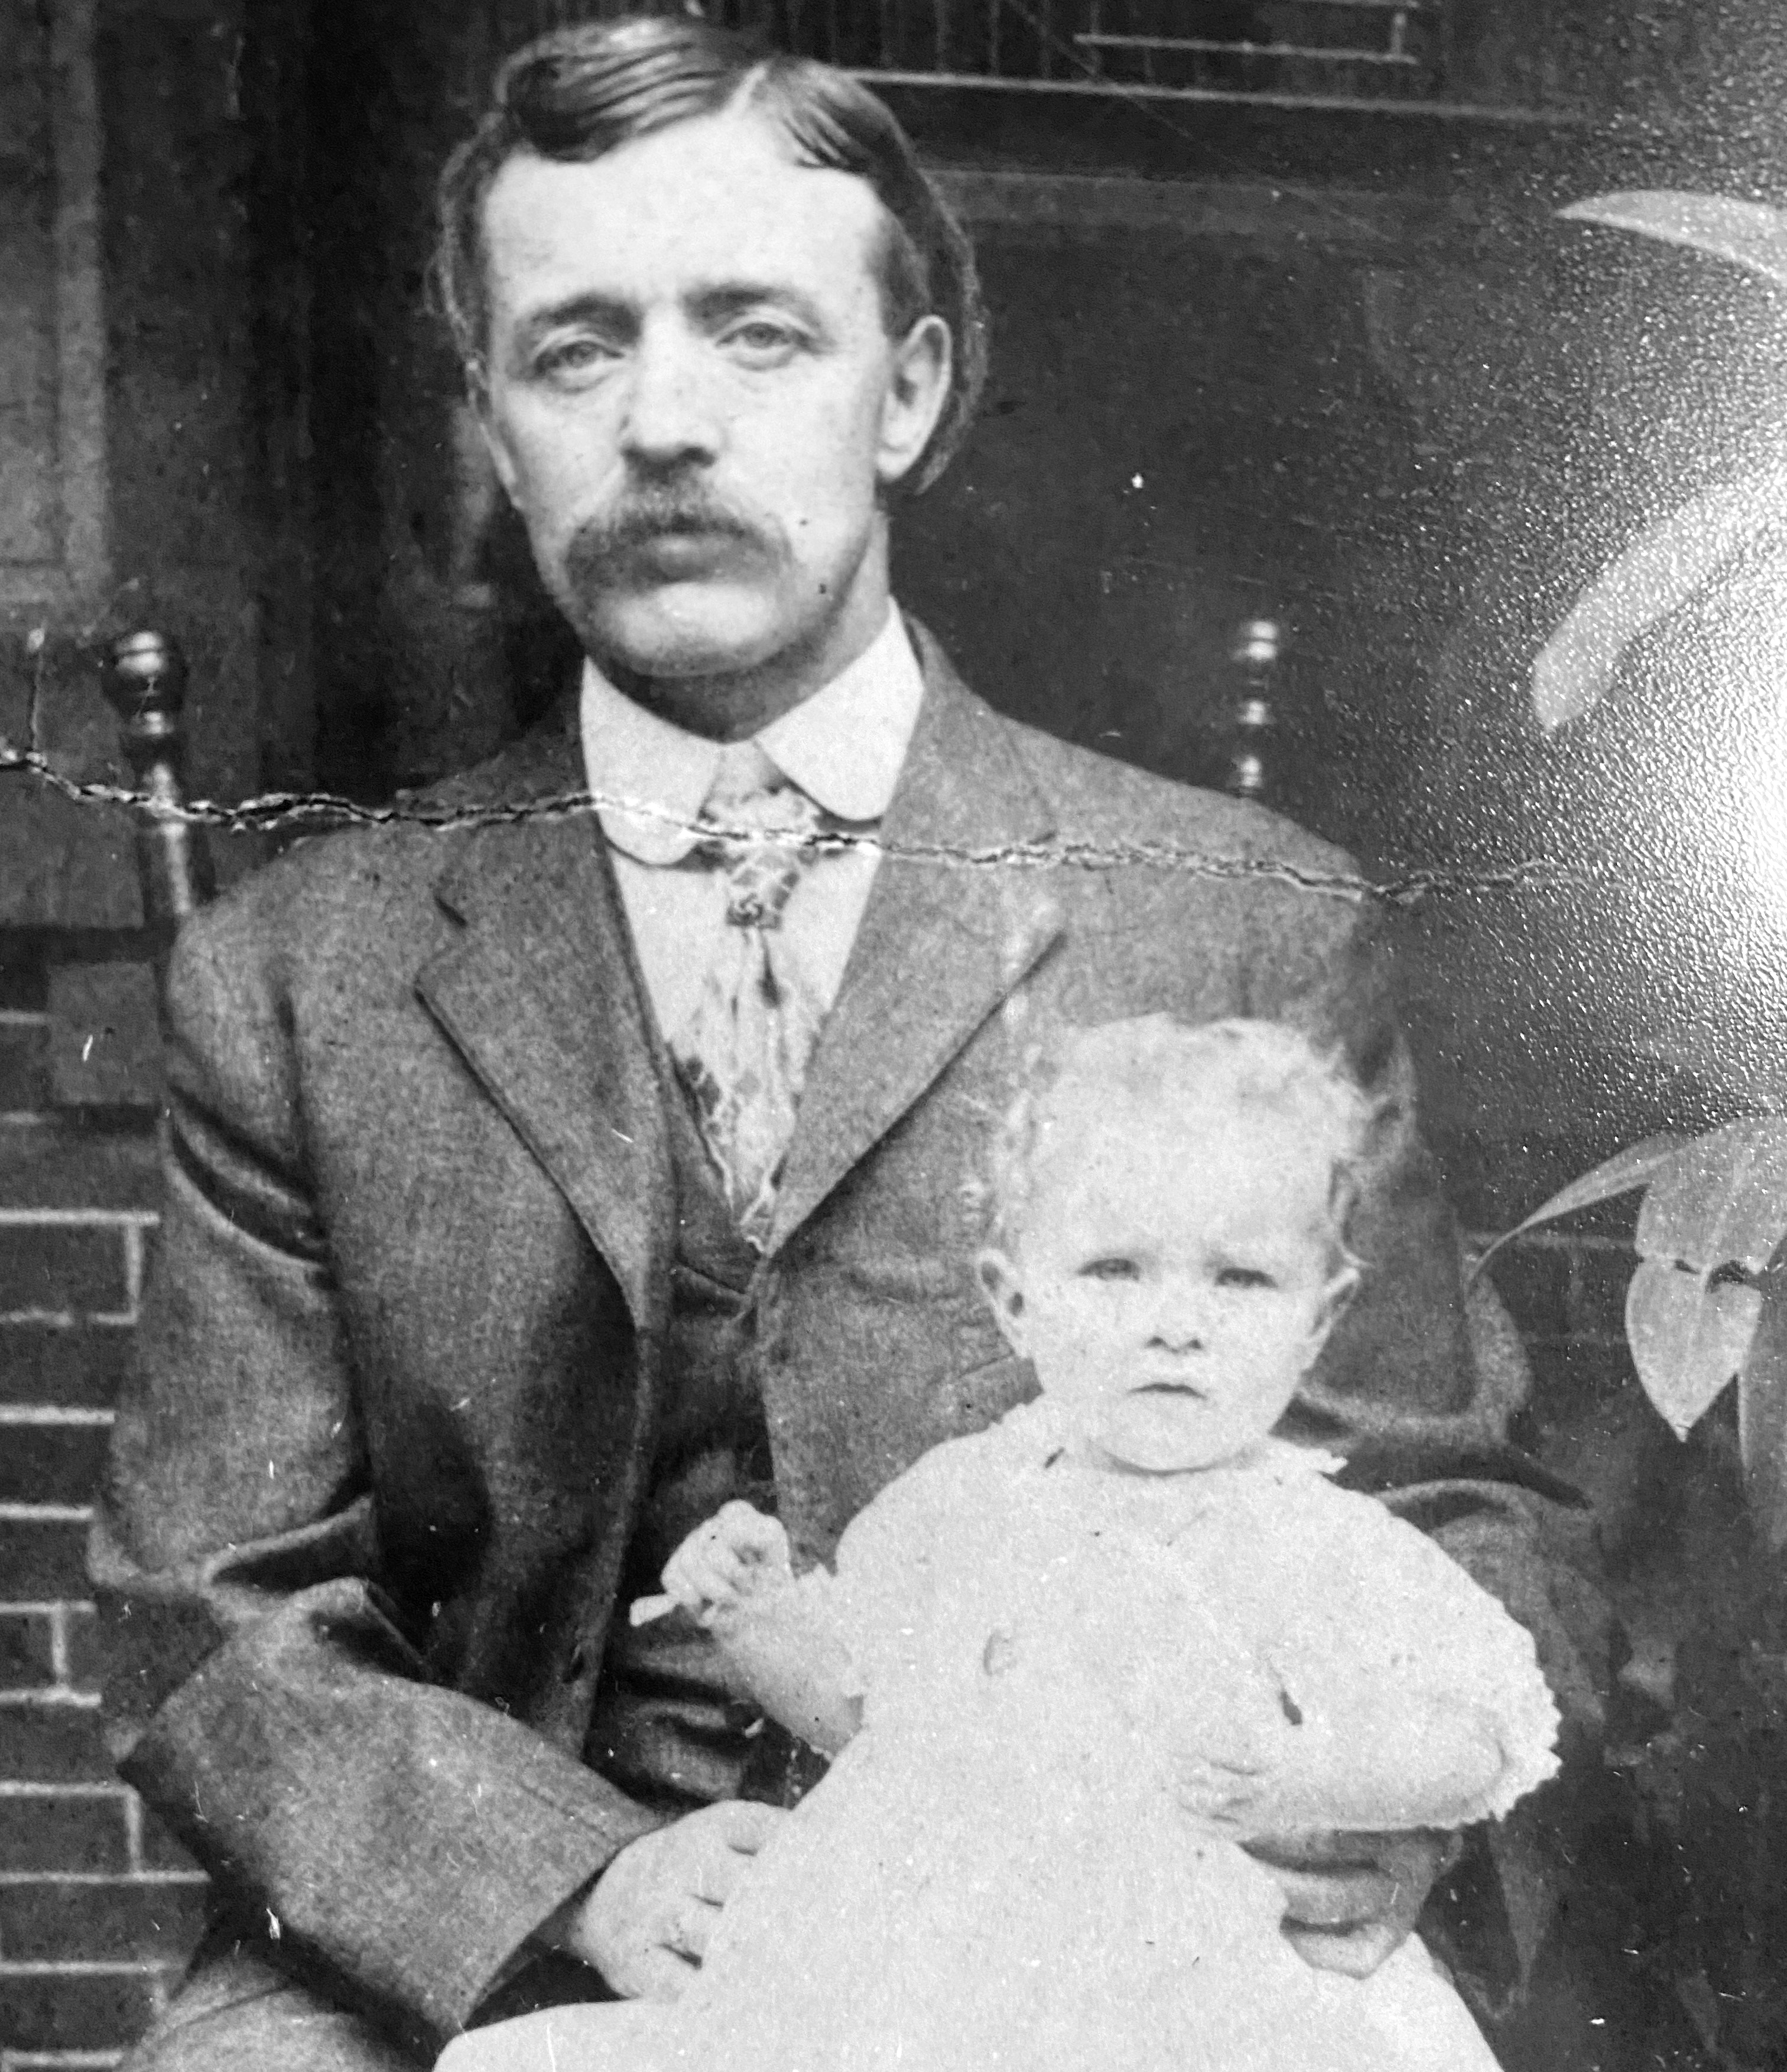 Samuel Haydon with one of his daughters in about 1908